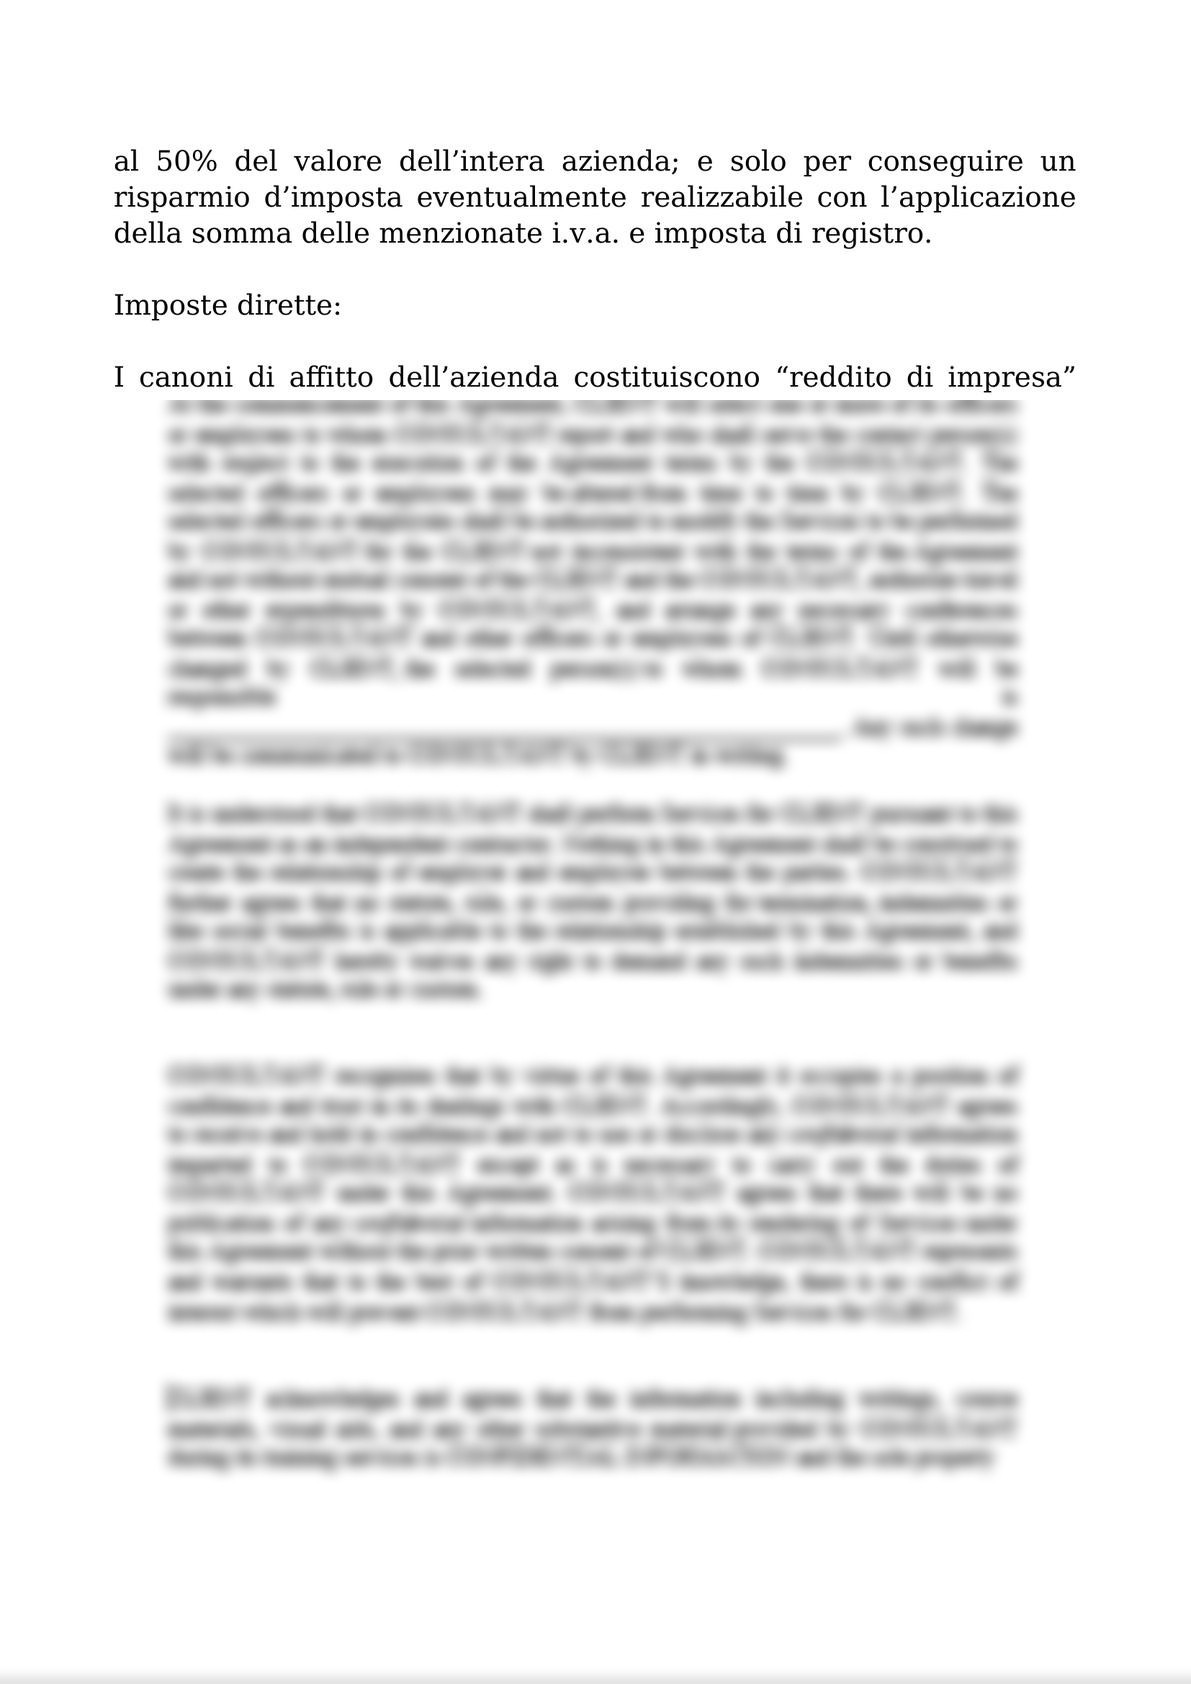 INTELLECTUAL WORK AGREEMENT FOR OUT-OF-COURT ACTIVITIES AND ATTACHMENTS 1 (PRIVACY); 2 (ANTI-MONEY LAUNDERING); AND 3 FEE QUOTE / CONTRATTO D’OPERA INTELLETTUALE STRAGIUDIZIALE-13